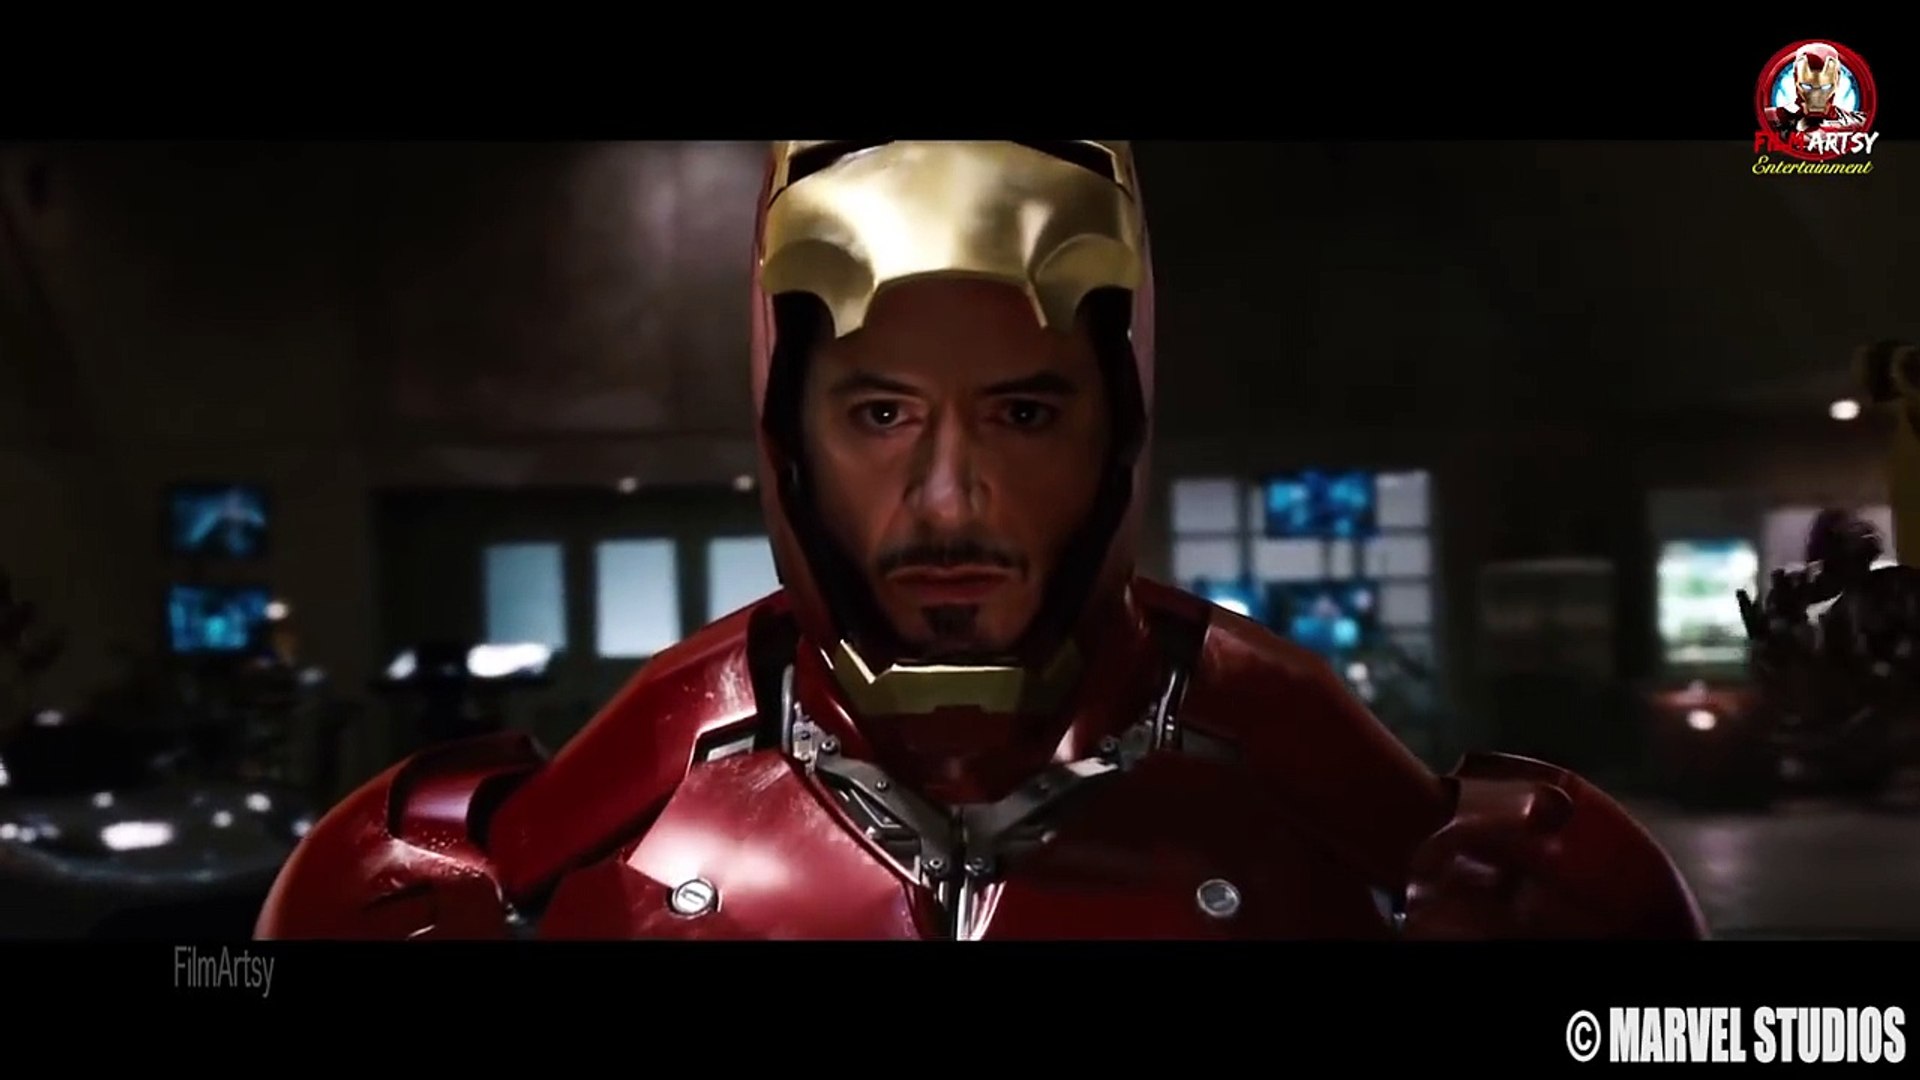 Iron Man All Suit Up Scenes From Iron Man 1 to Avengers- Infinity War -  Dailymotion Video